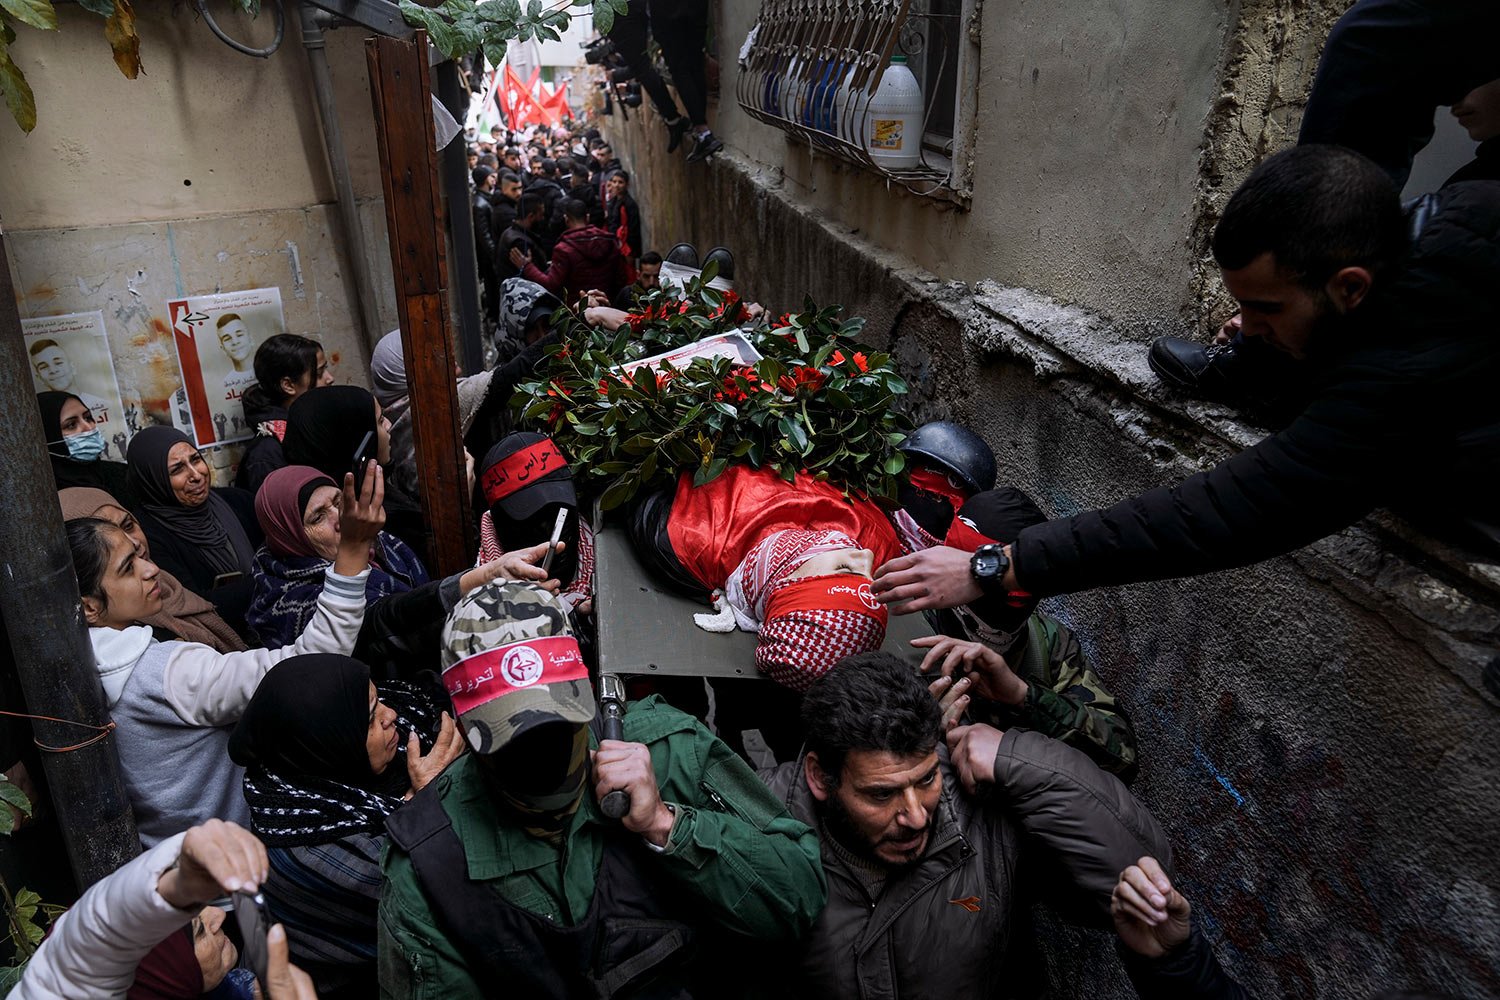  Mourners carry the body of 15-year-old Palestinian Adam Ayyad during his funeral in the West Bank city of Bethlehem, Tuesday, Jan. 3, 2023. (AP Photo/Mahmoud Illean) 